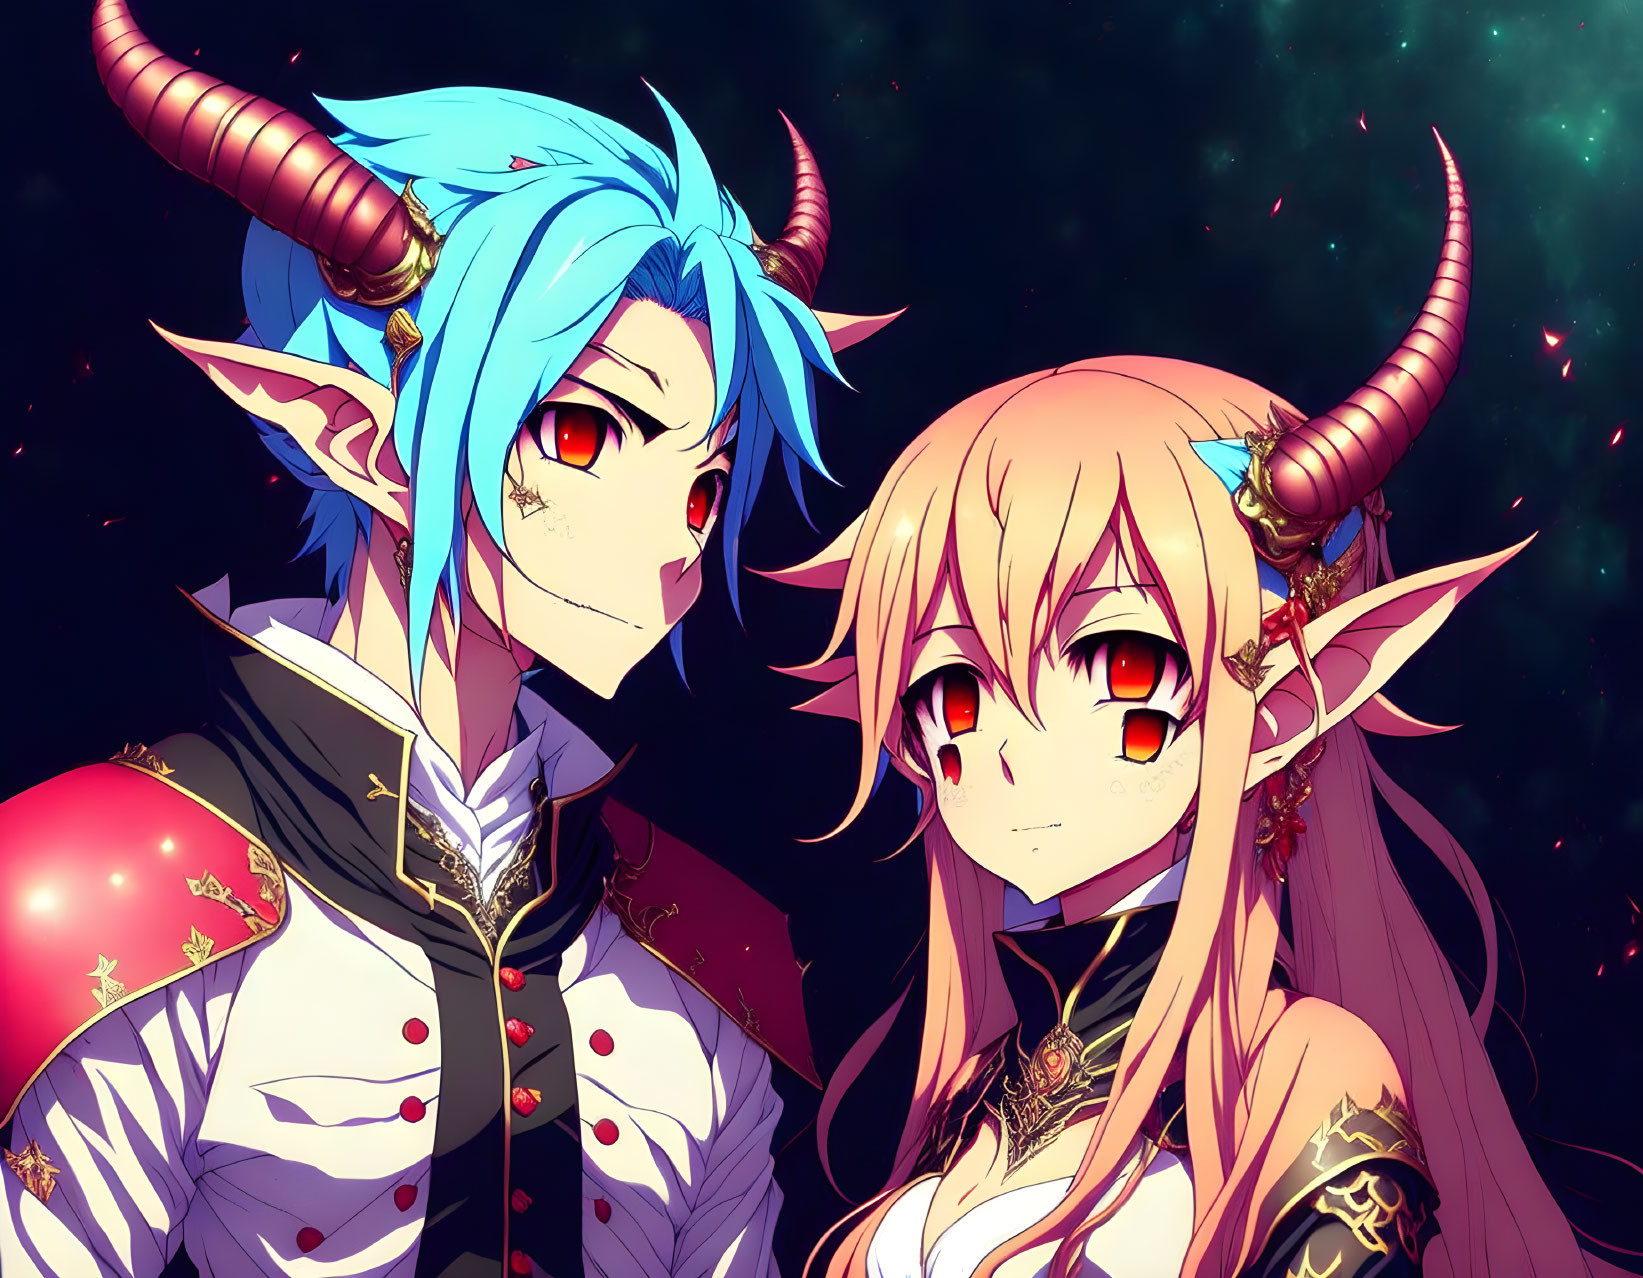 Anime-style characters with horns and pointed ears in blue and pink hair on starry background